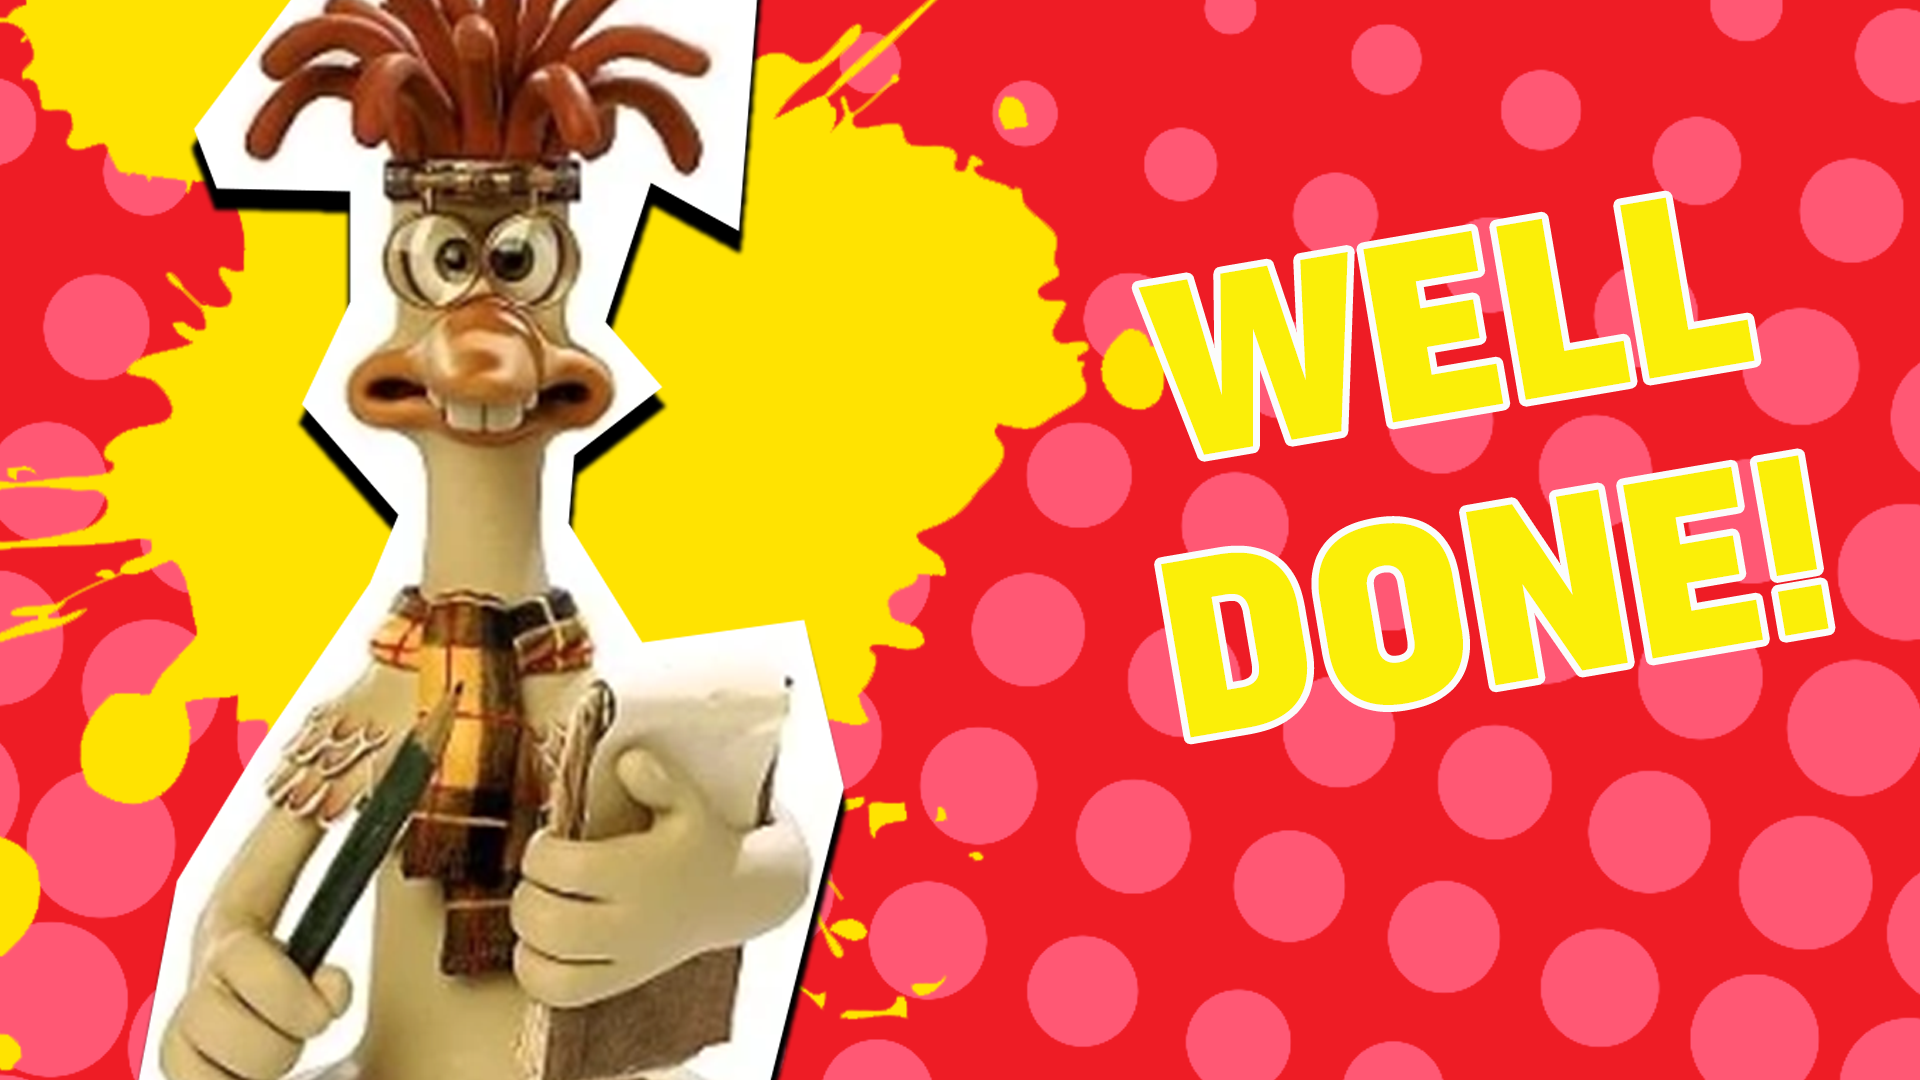 Well done! We can see you love chicken run more than anything - are you ready to get 100% next time?